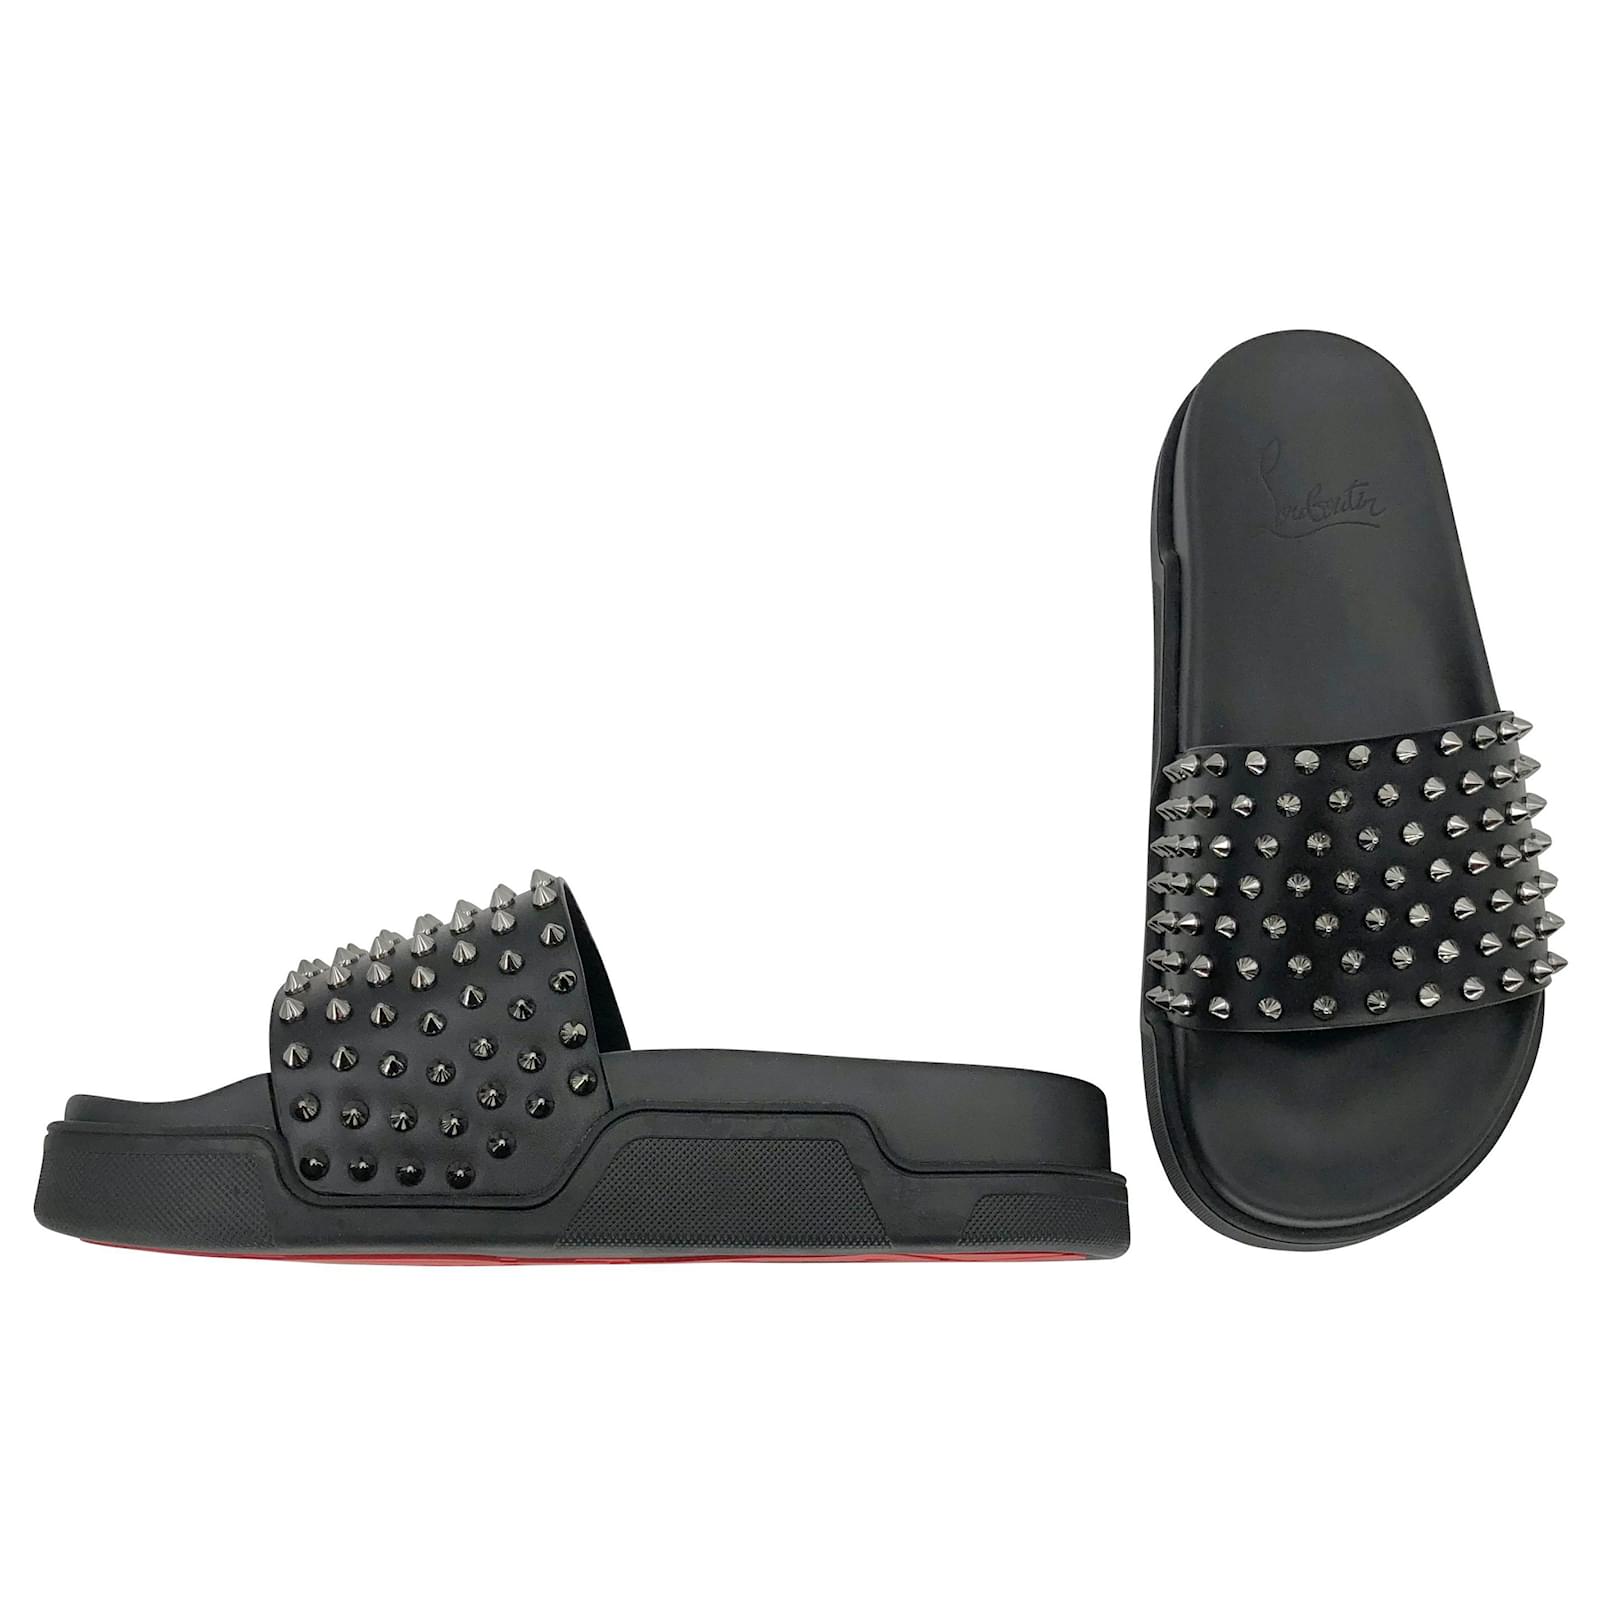 Christian Louboutin Louboutin slides in black leather with spikes